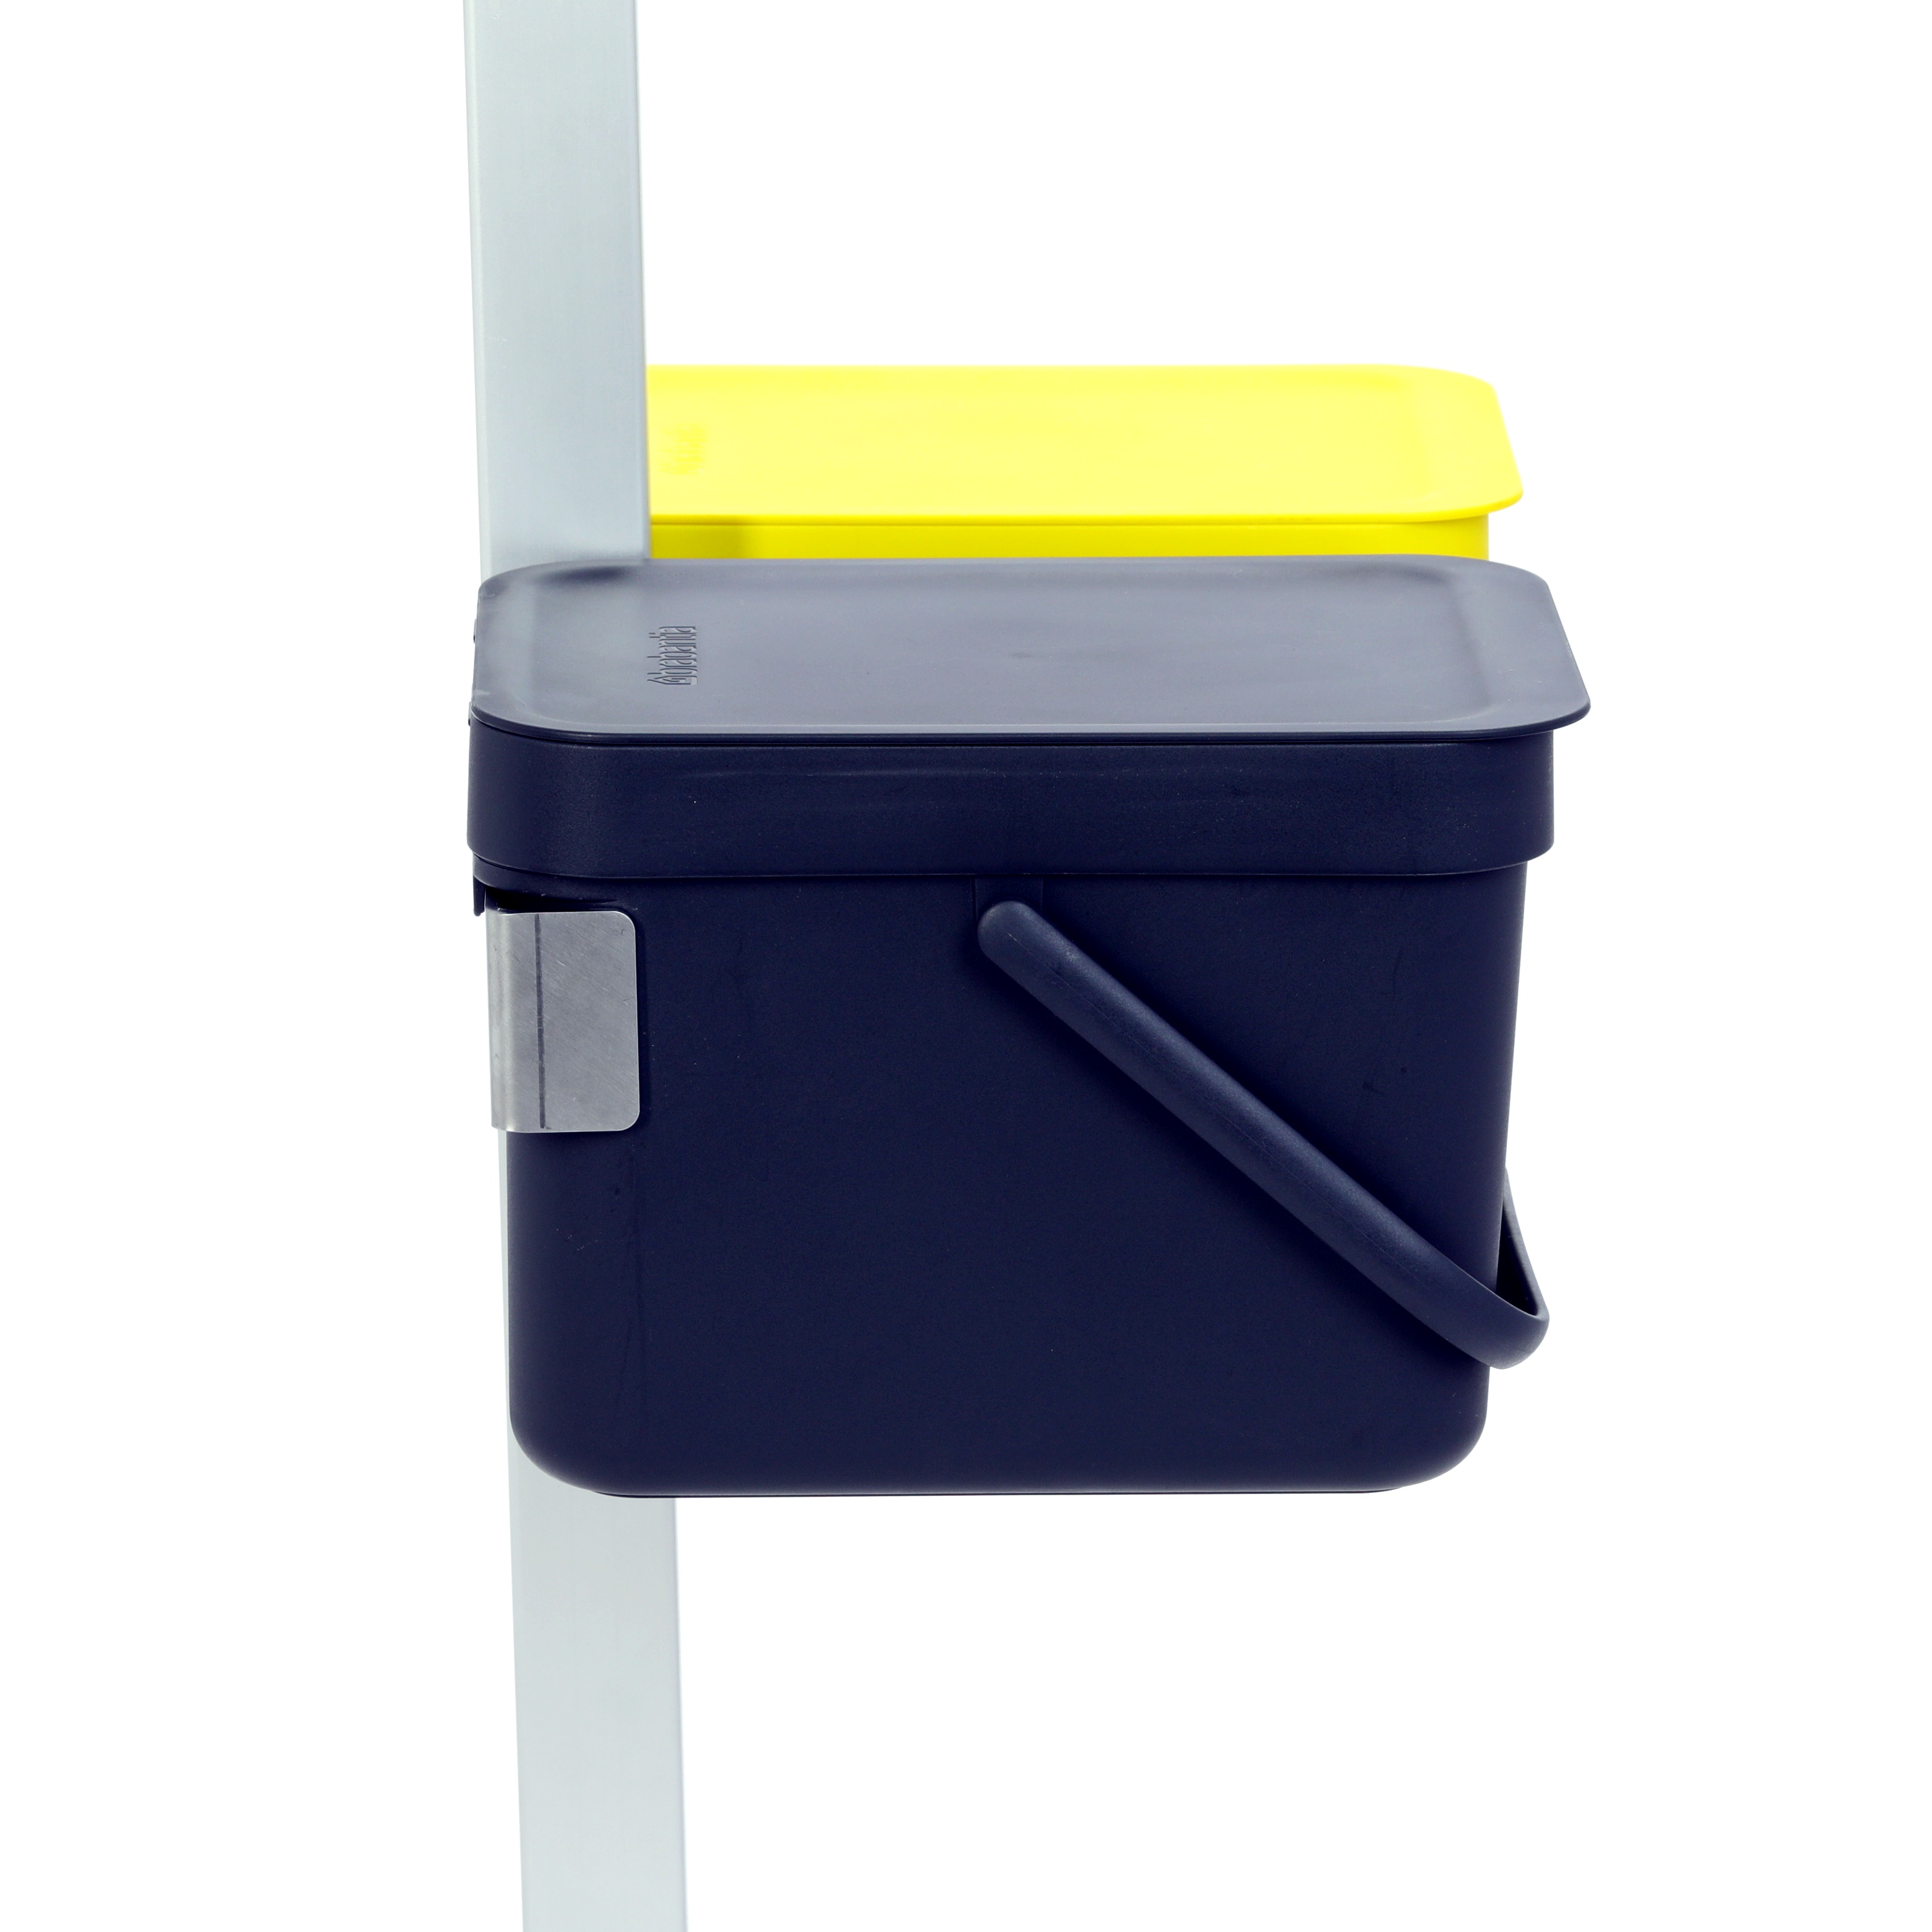 2 Pcs. Waste Container à 6 Liter with holder 